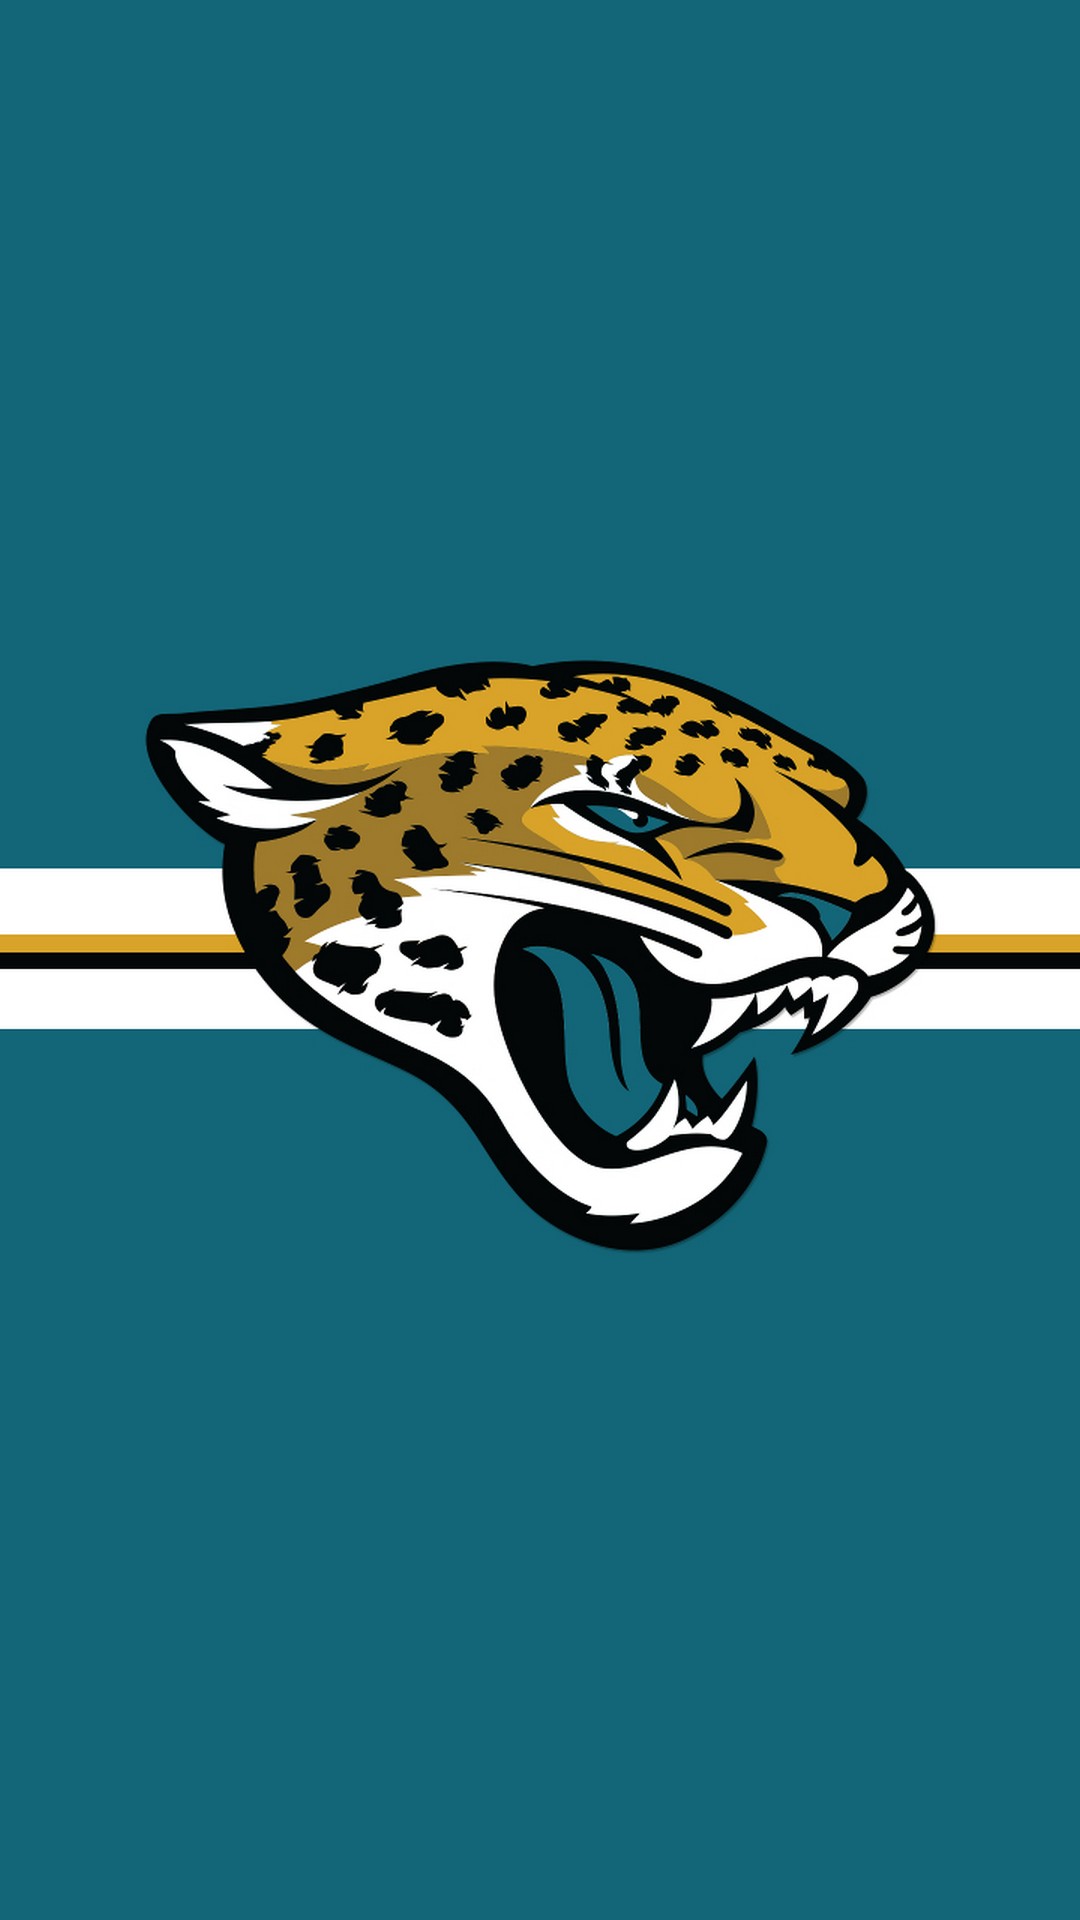 iPhone Wallpaper HD Jacksonville Jaguars With high-resolution 1080X1920 pixel. You can use this wallpaper for your Mac or Windows Desktop Background, iPhone, Android or Tablet and another Smartphone device